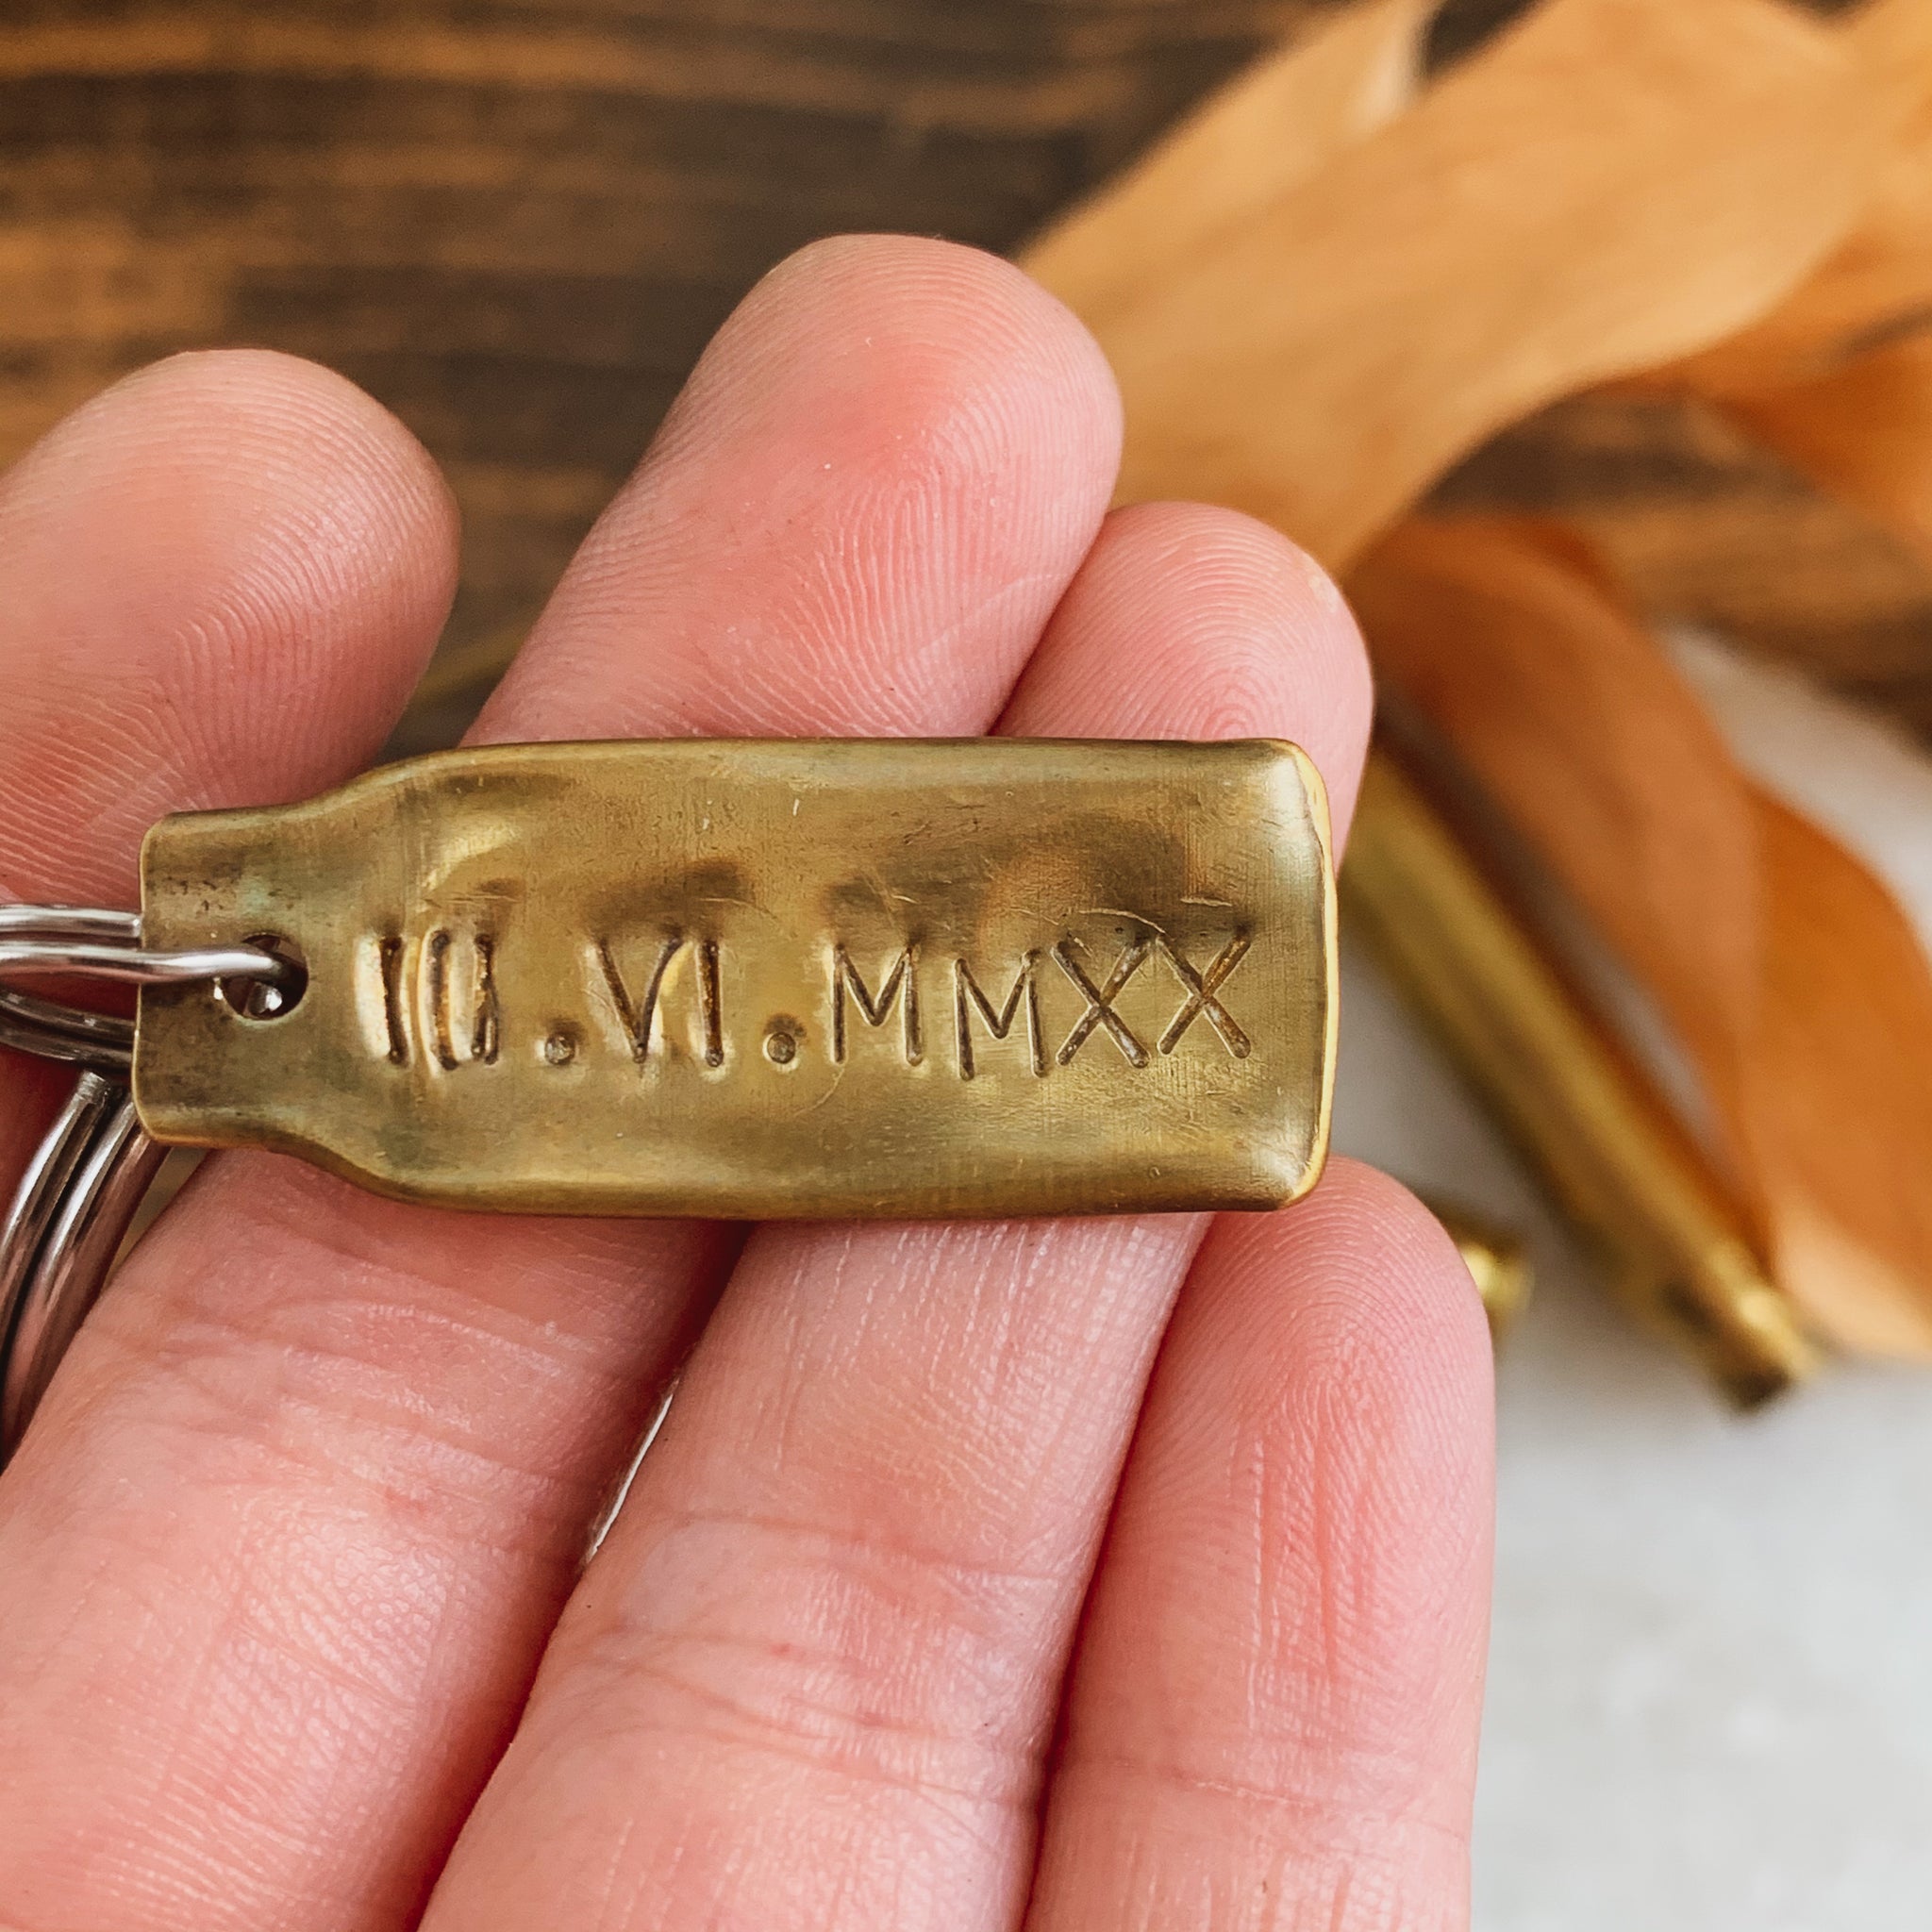 Making bullet shell casing keychains! 